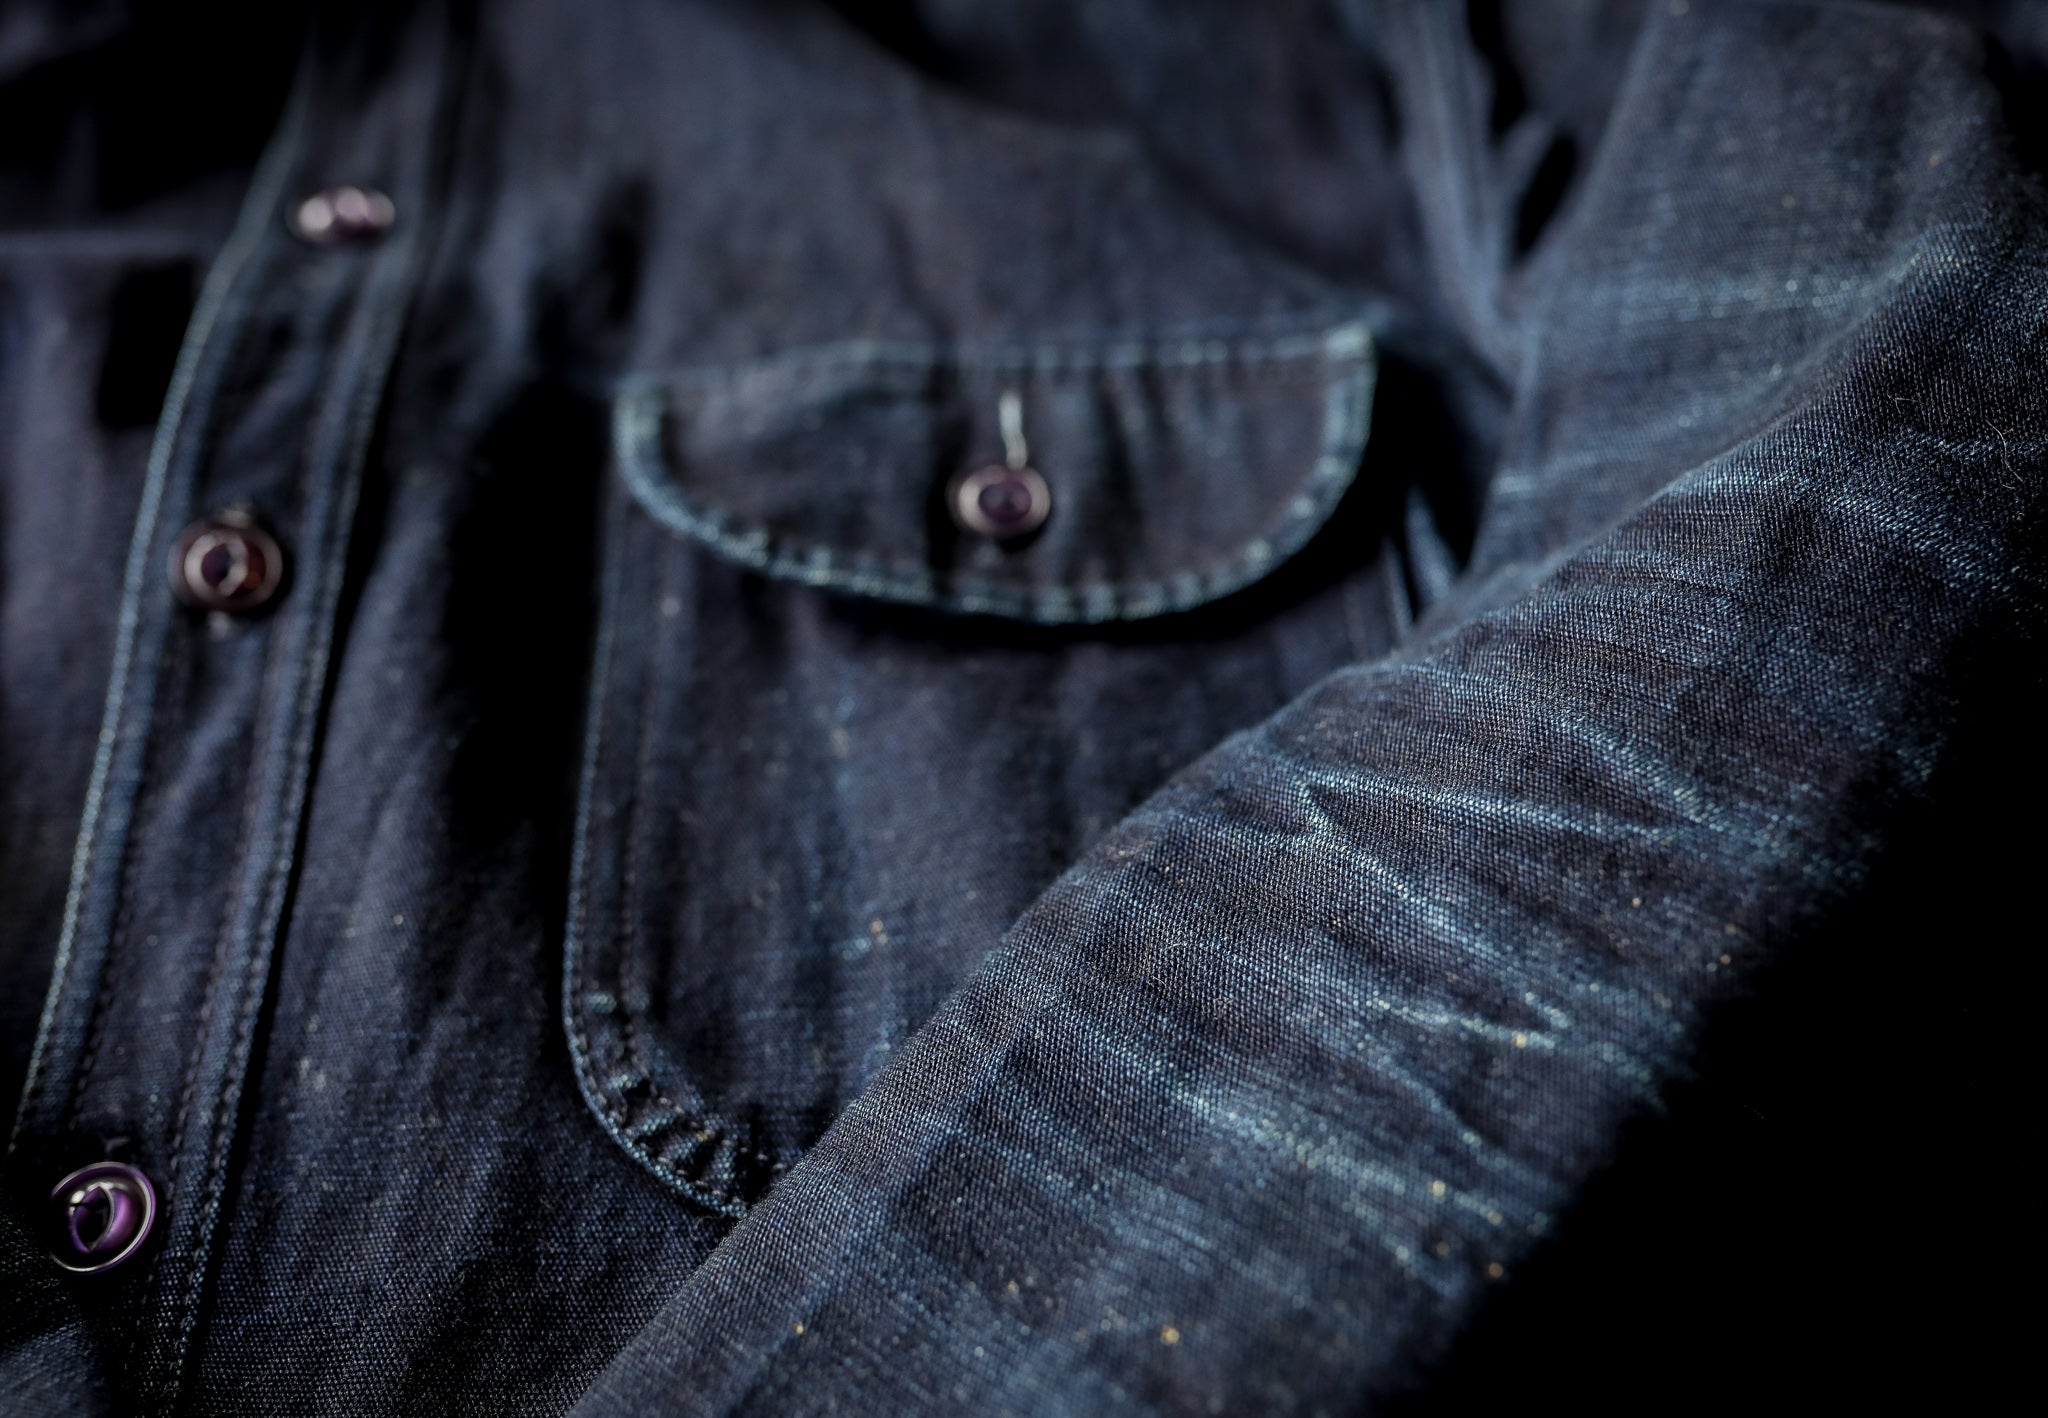 ROGUE TERRITORY Indigo Selvedge Canvas Work Shirt - One Year Review